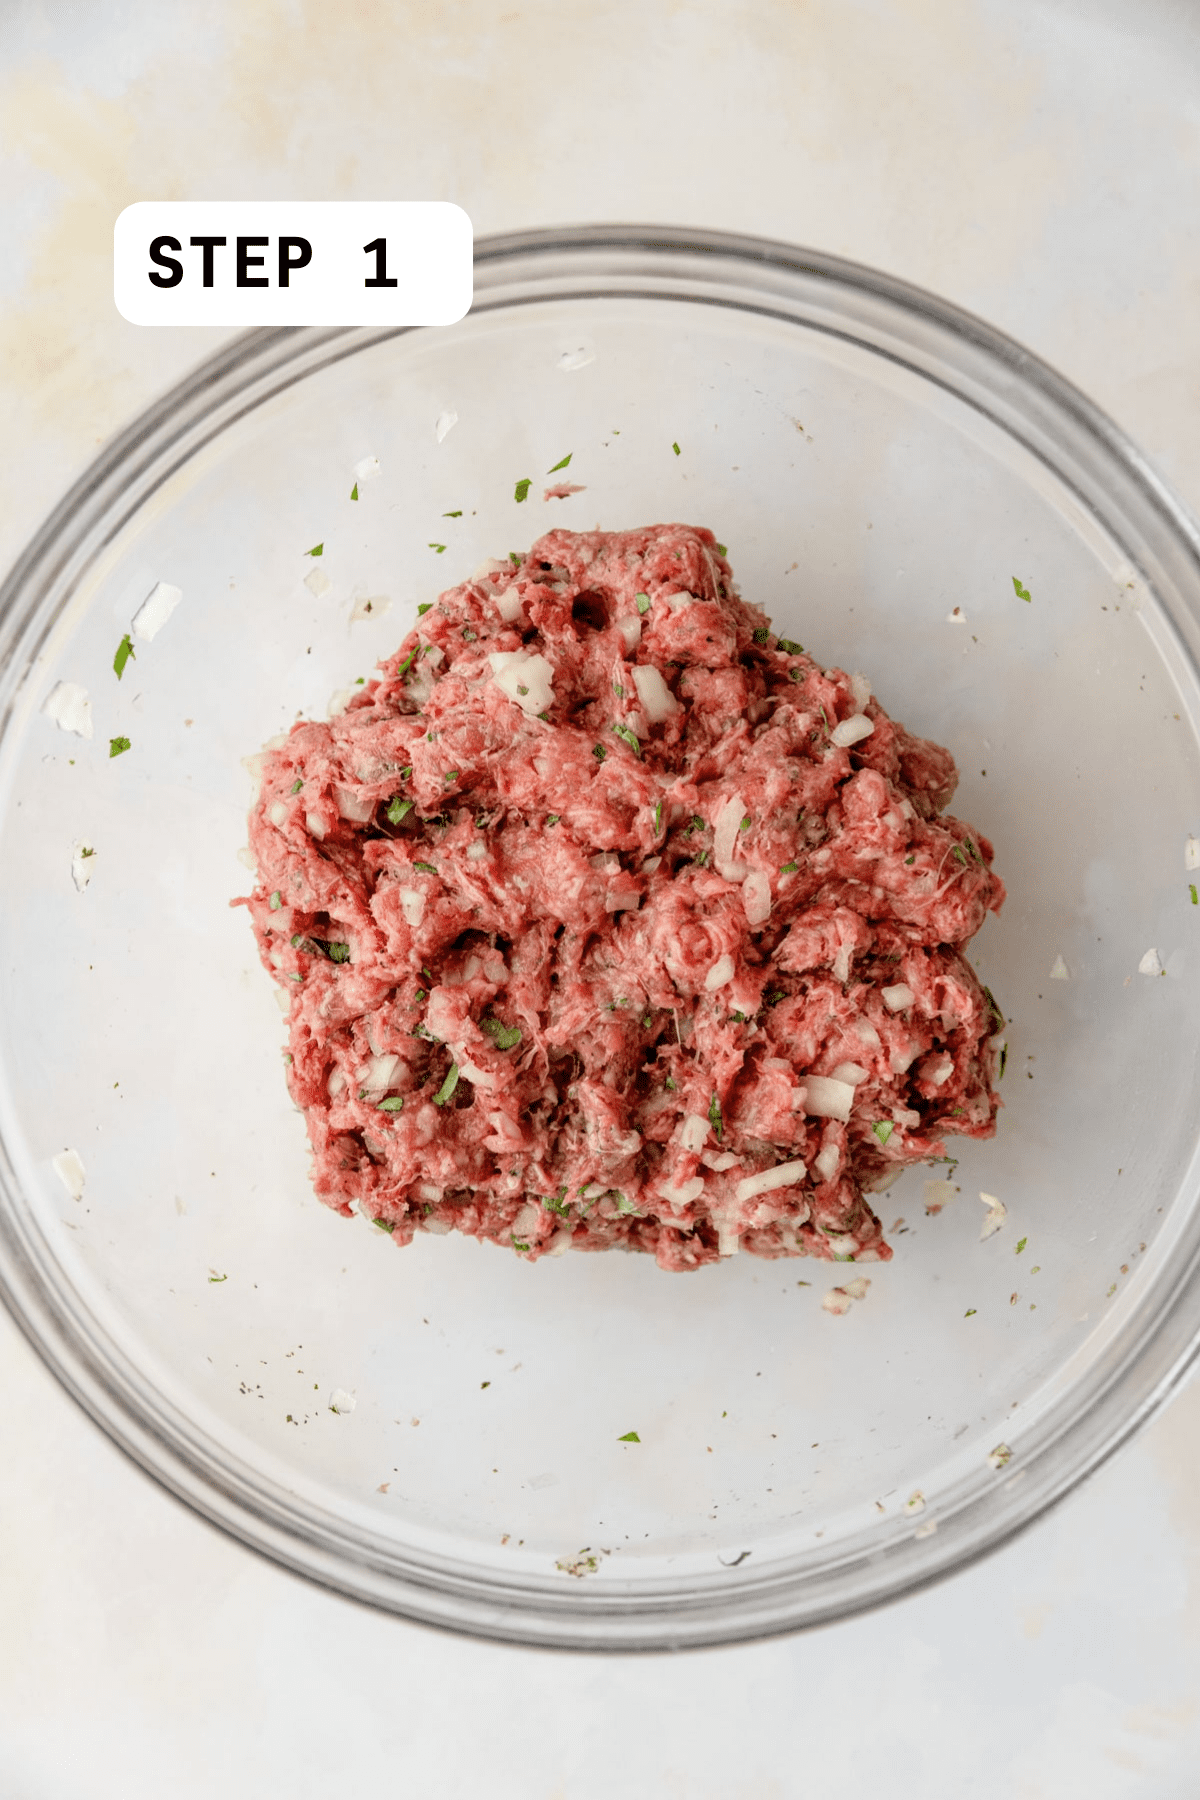 Ground beef mixed with onion, spices, and parsley.